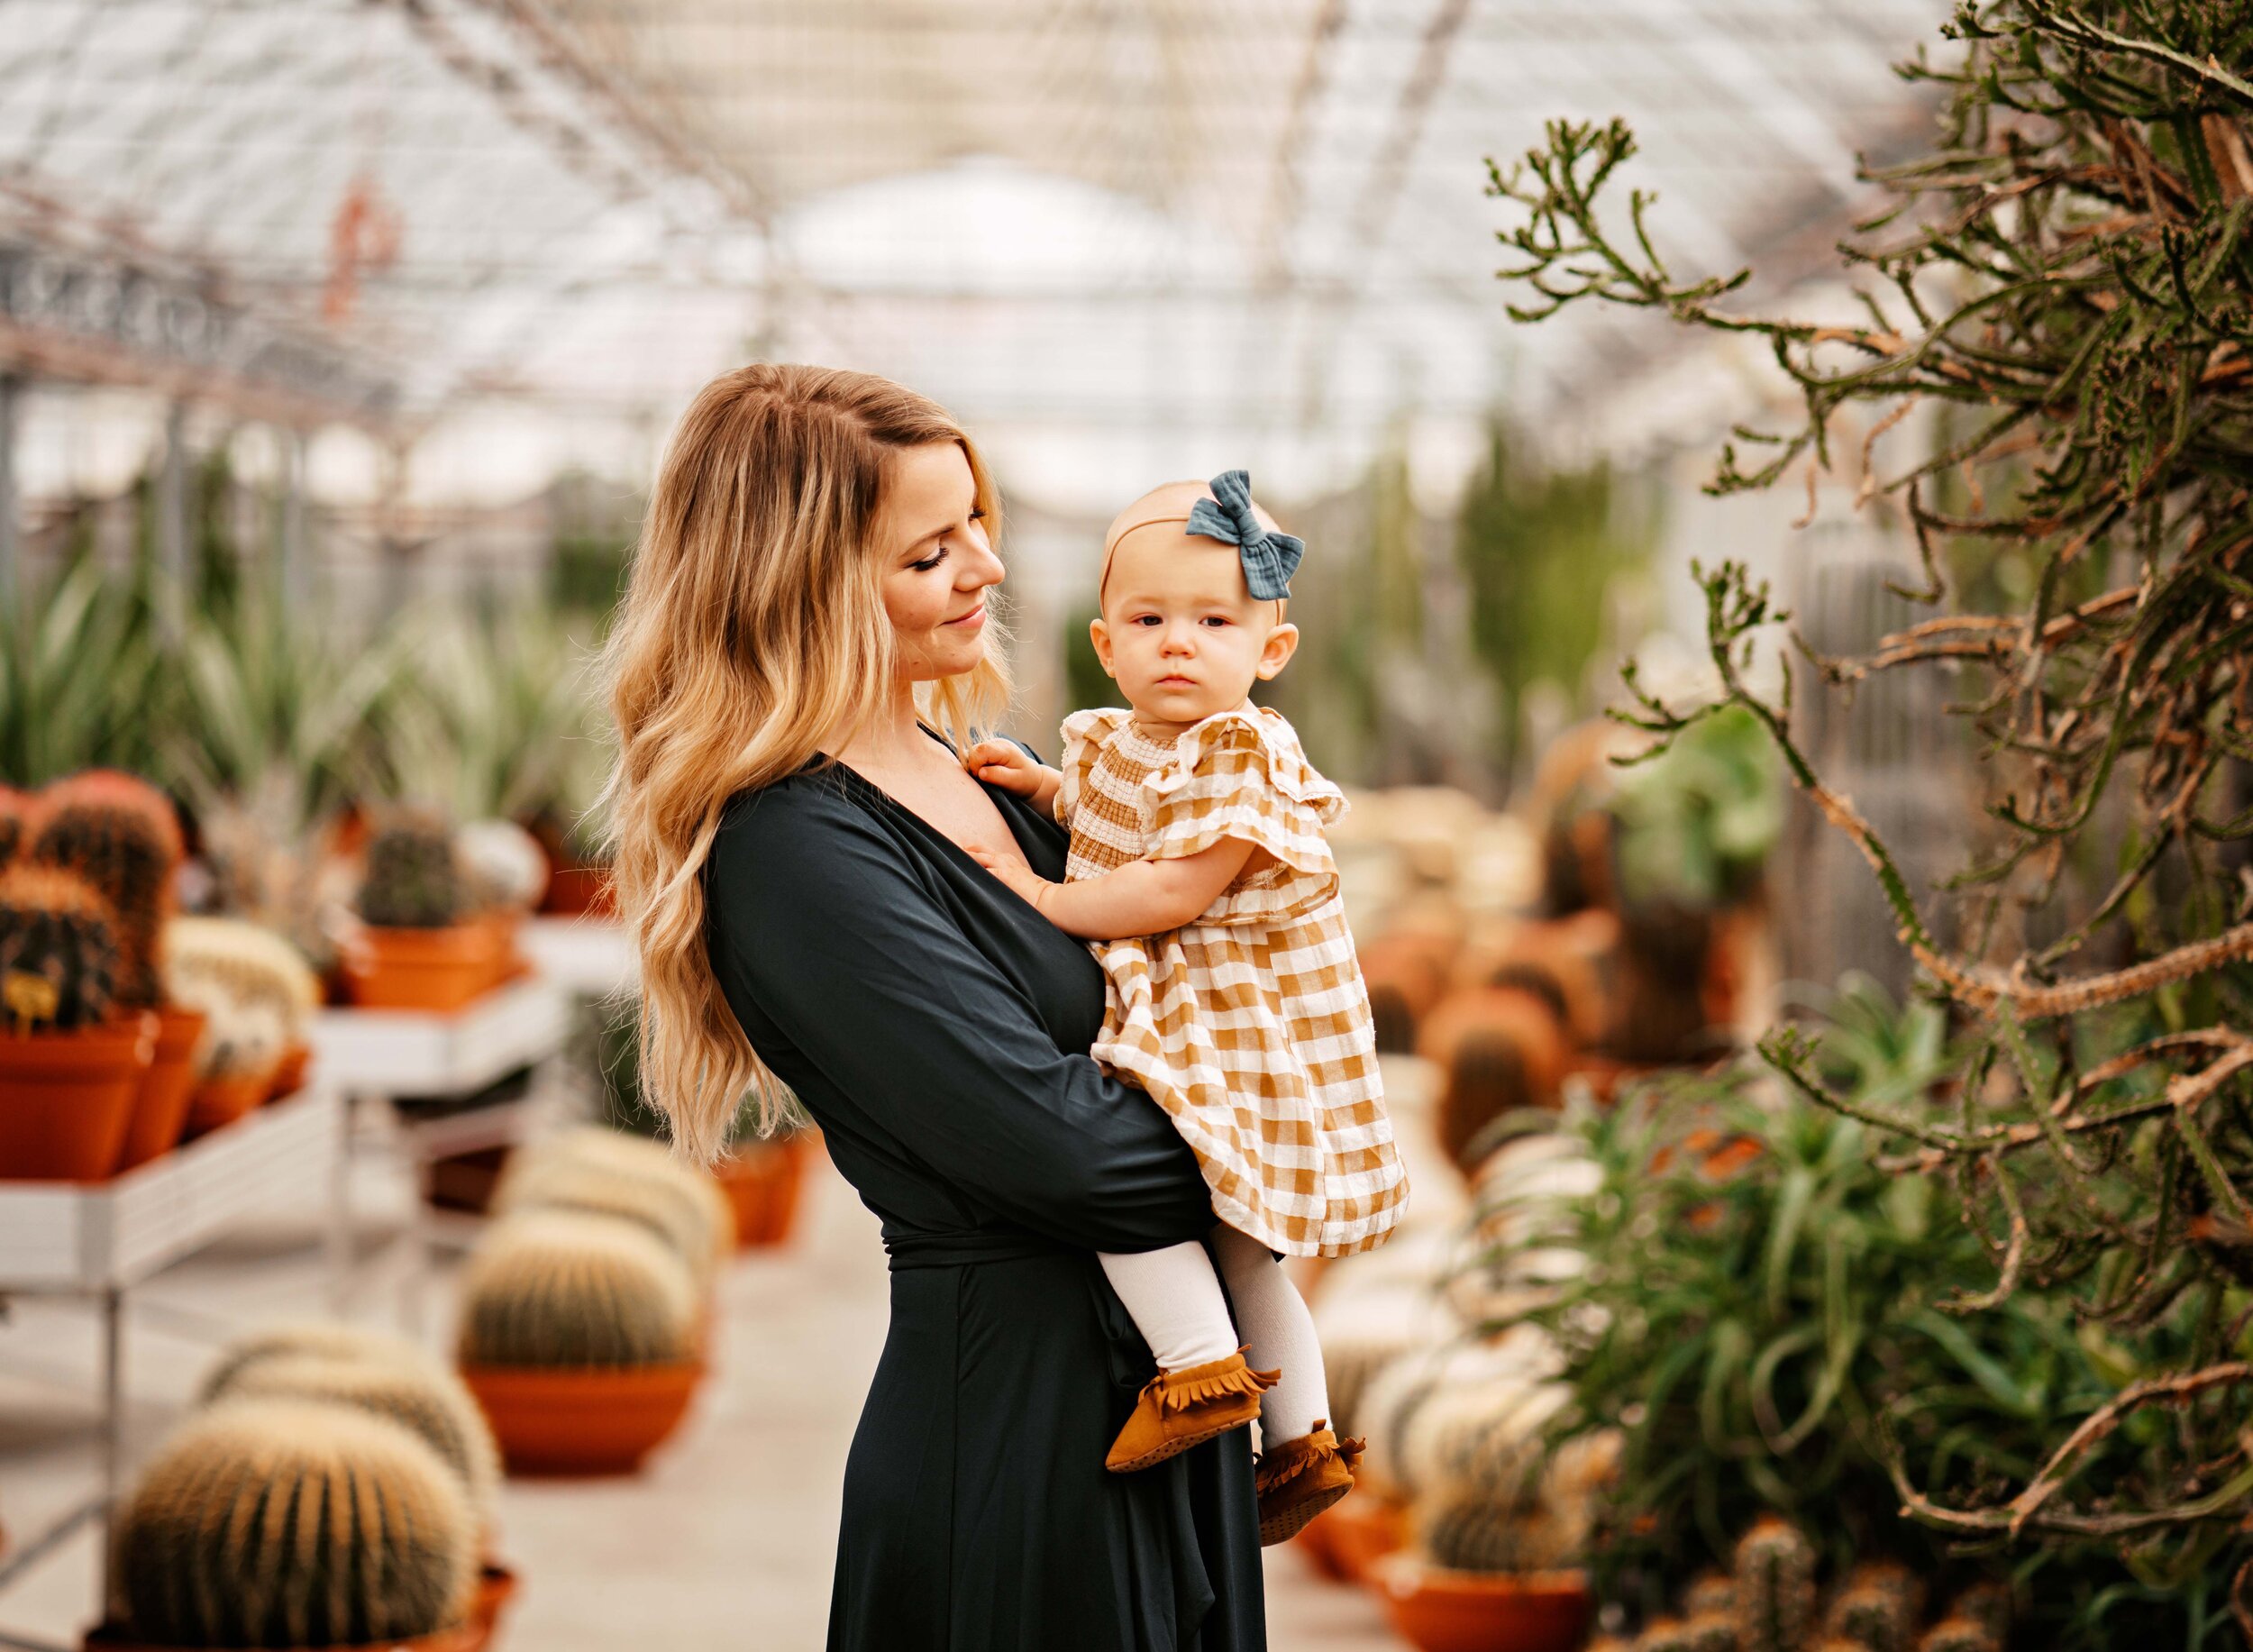  boho inspired portrait photo session in a greenhouse at Kakteenland Steinfeld by ramstein KMC family and portrait photographer Sarah Havens, Germany    exklusives Fotoshooting im Gewächshaus im Kakteenland Steinfeld von Fotografin Sarah Havens aus K